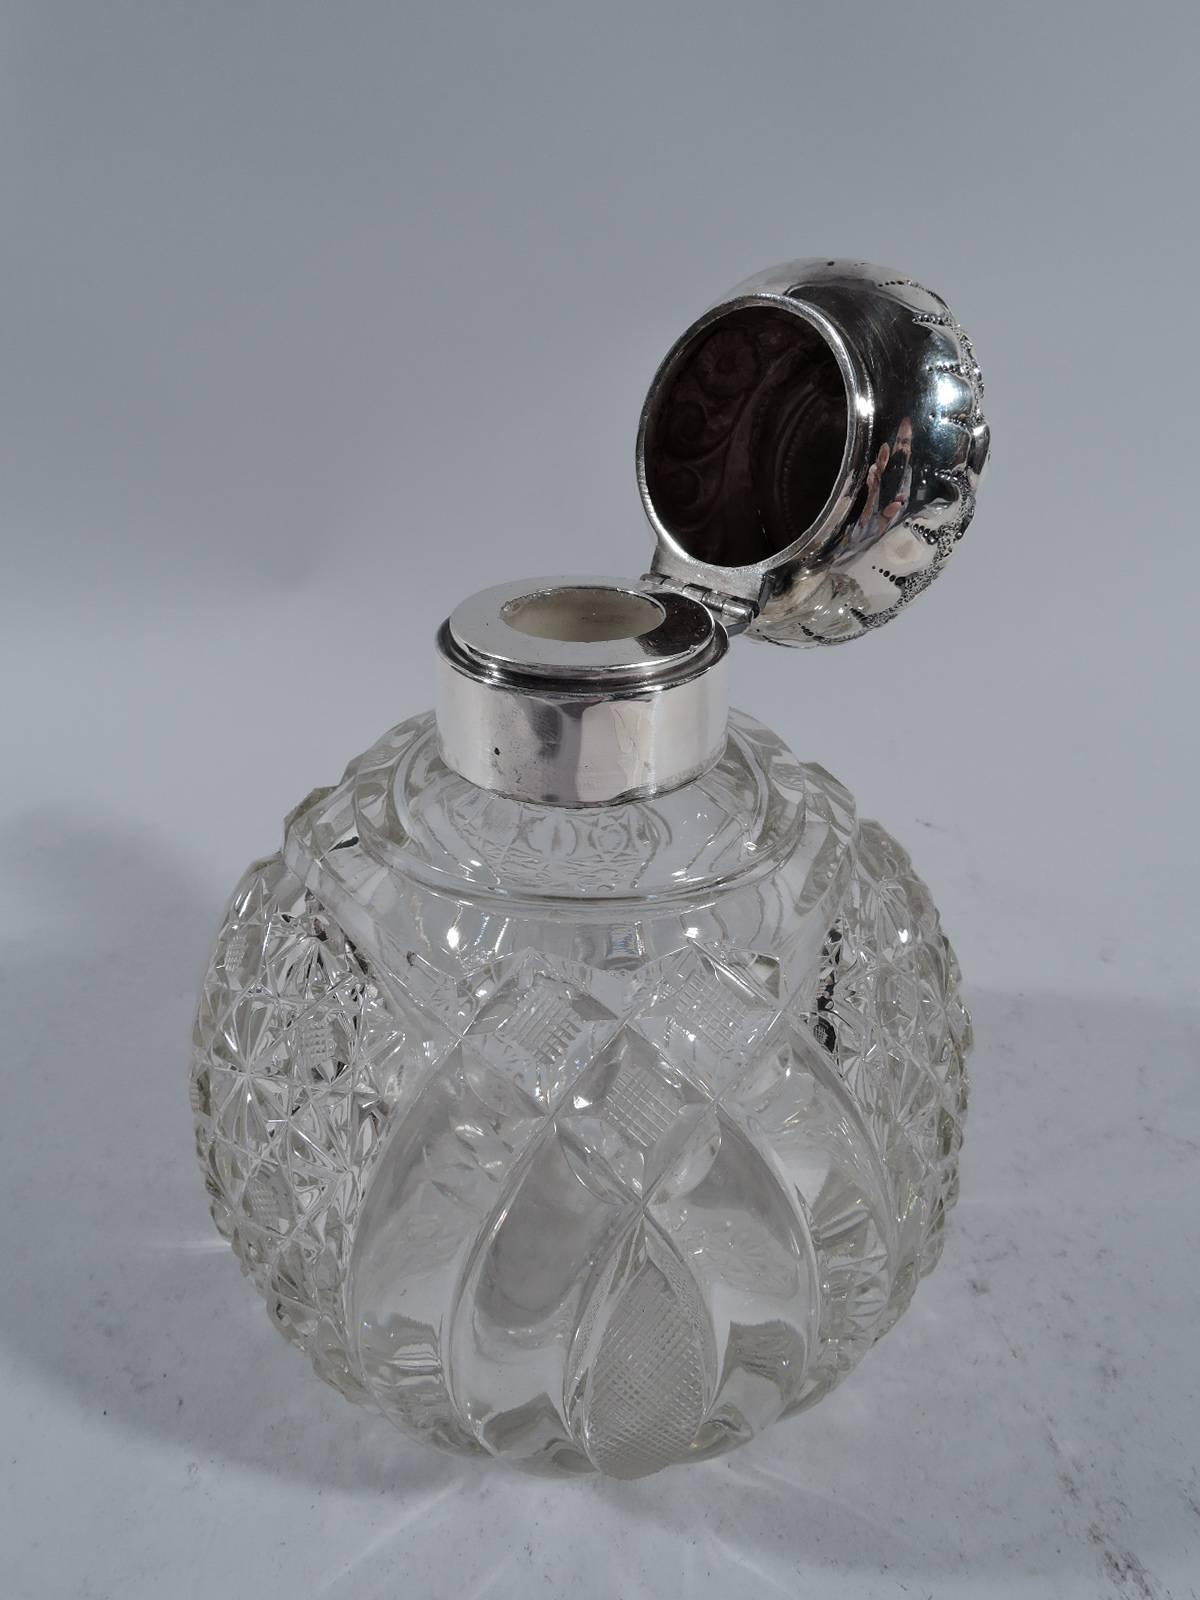 Edwardian clear glass perfume bottle with sterling silver mount. Made in Birmingham in 1901. Globular with diaper pattern and C-scrolls. Short neck has silver collar with hinged bun cover. Cover has repousse flowers on stippled ground and scrolled